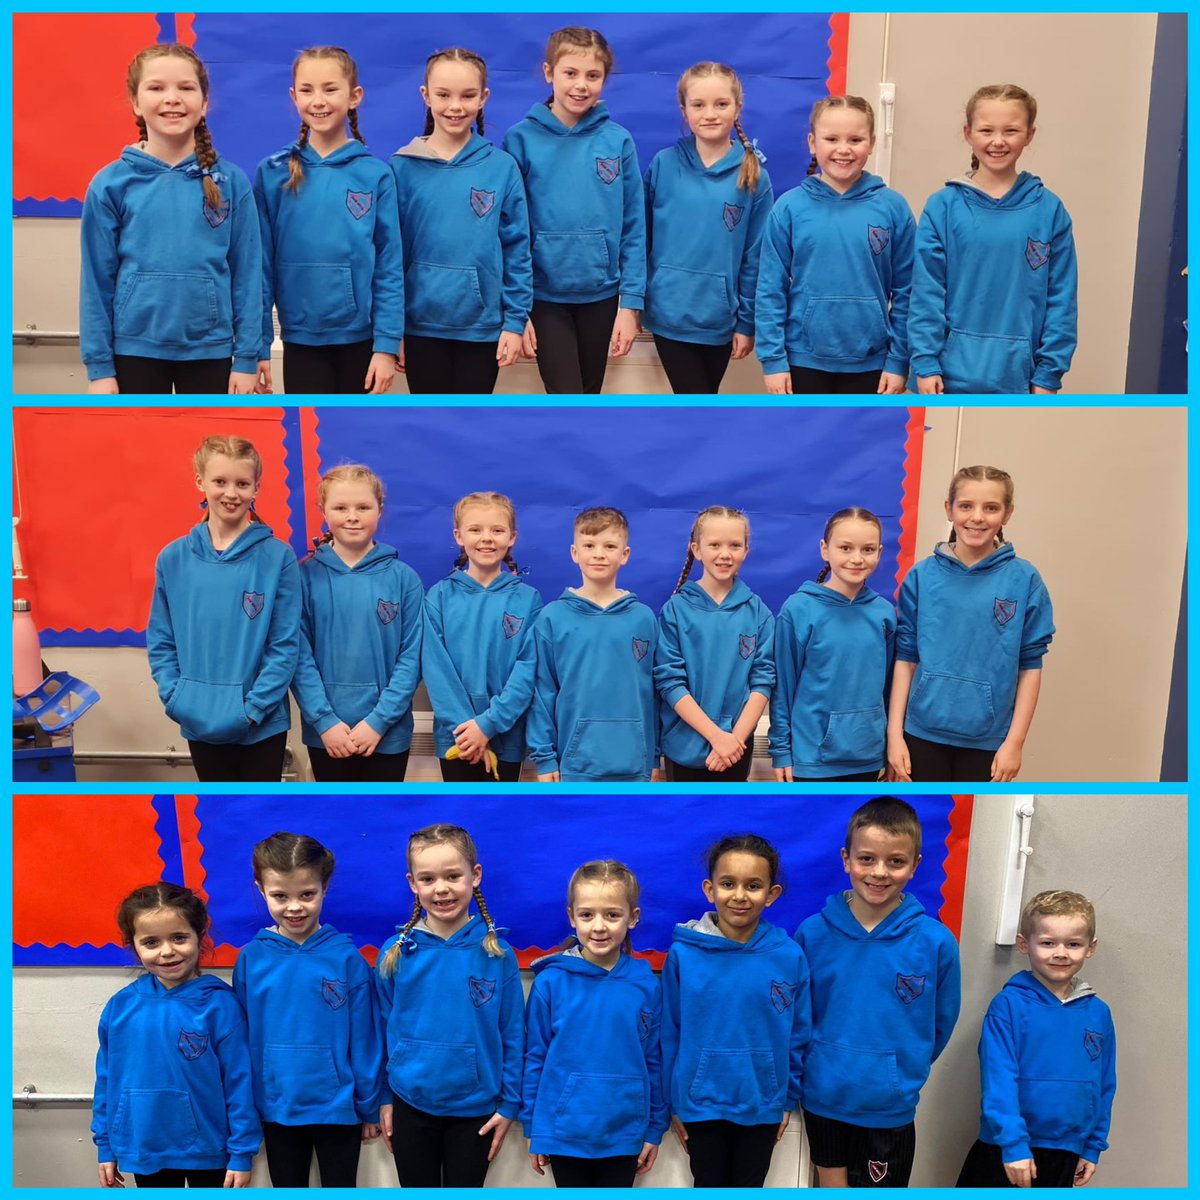 Well done to our Key Steps 1 team who came 3rd at the Furness Gymnastics competition yesterday 🥉 Well done to Key Steps 2 and 3 who both performed brilliantly. We are so proud of you all 🤸‍♀️